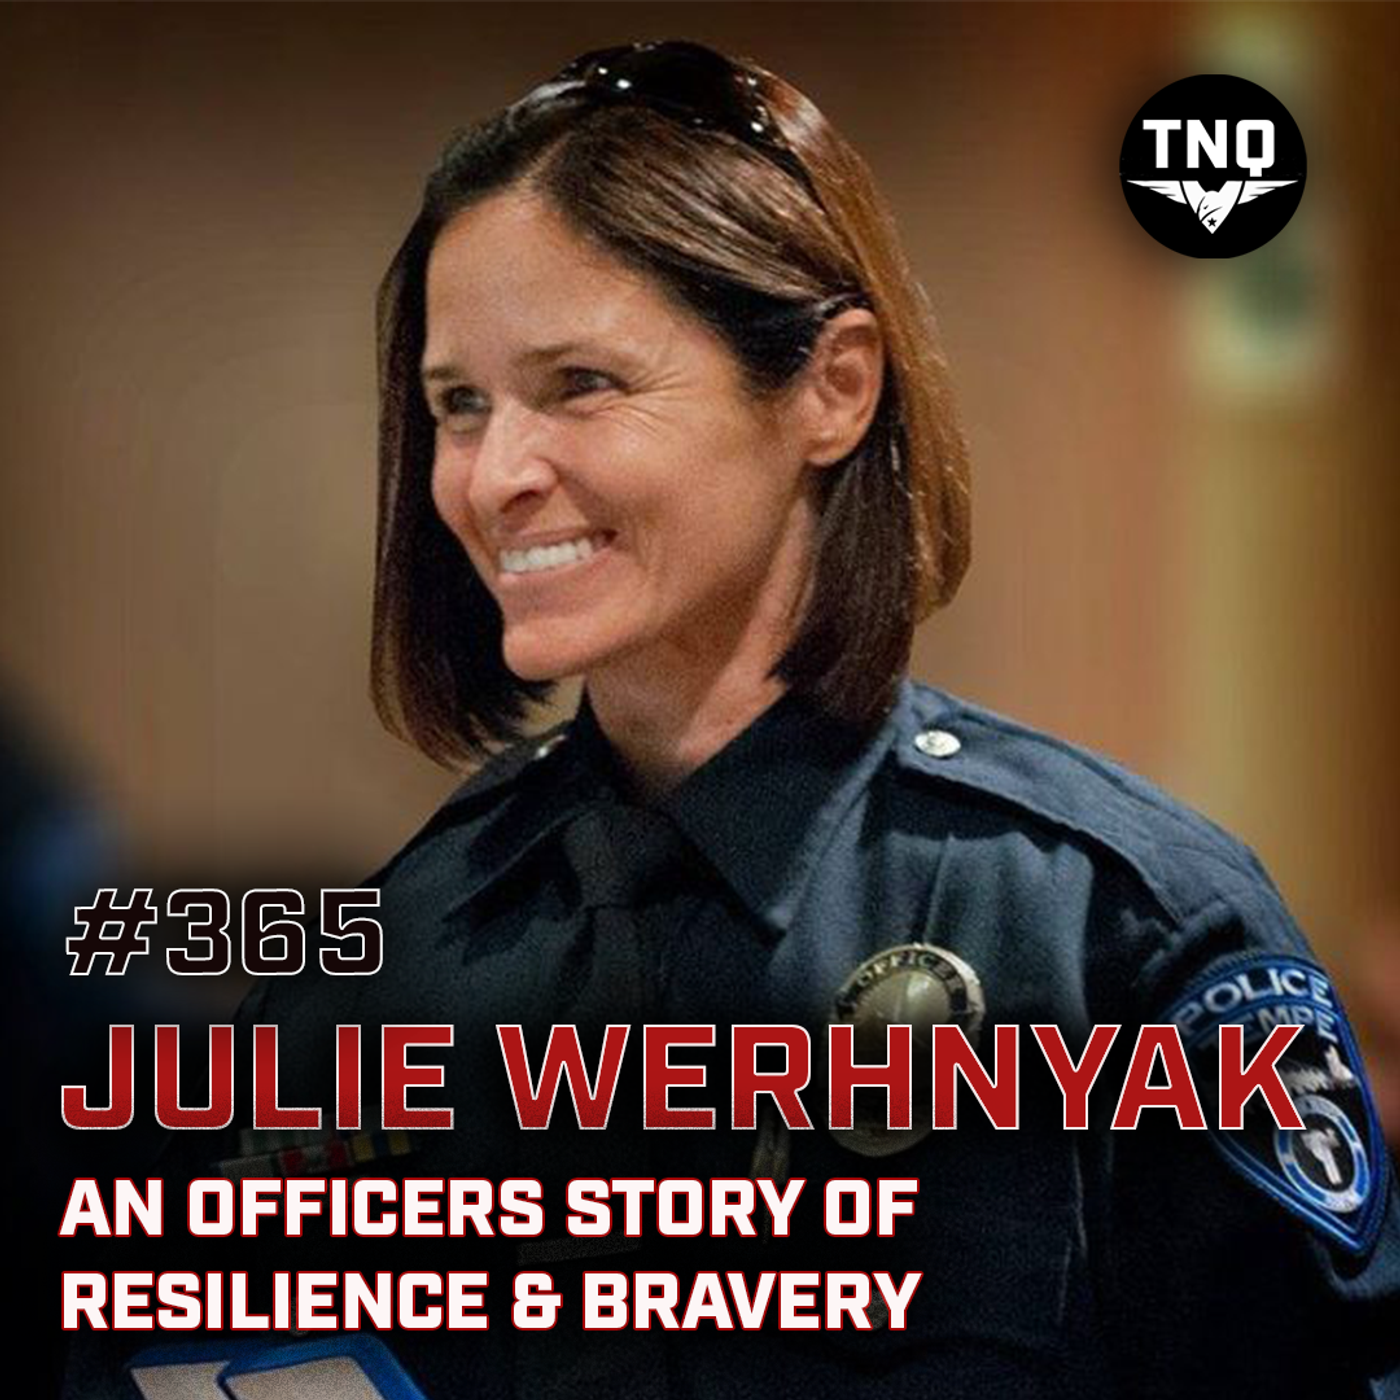 Julie Werhnyak: An Officers Story Of A Lethal Enounter In The Line Of Duty